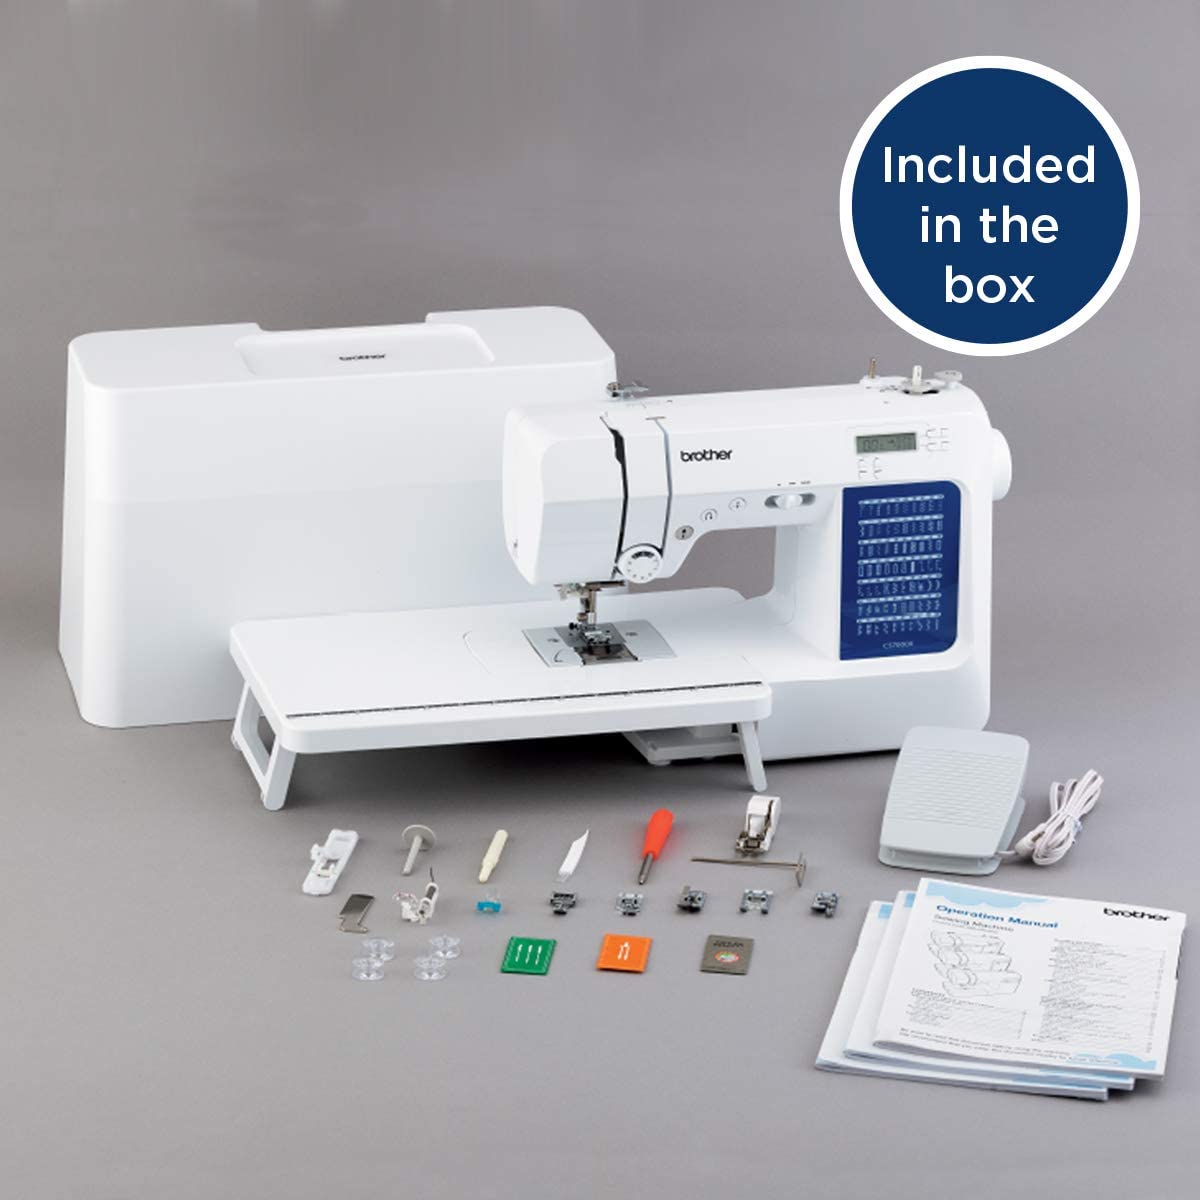 Brother CS7000X Computerized Sewing and Quilting Machine - Best Sewing Machine for Beginner Quilters